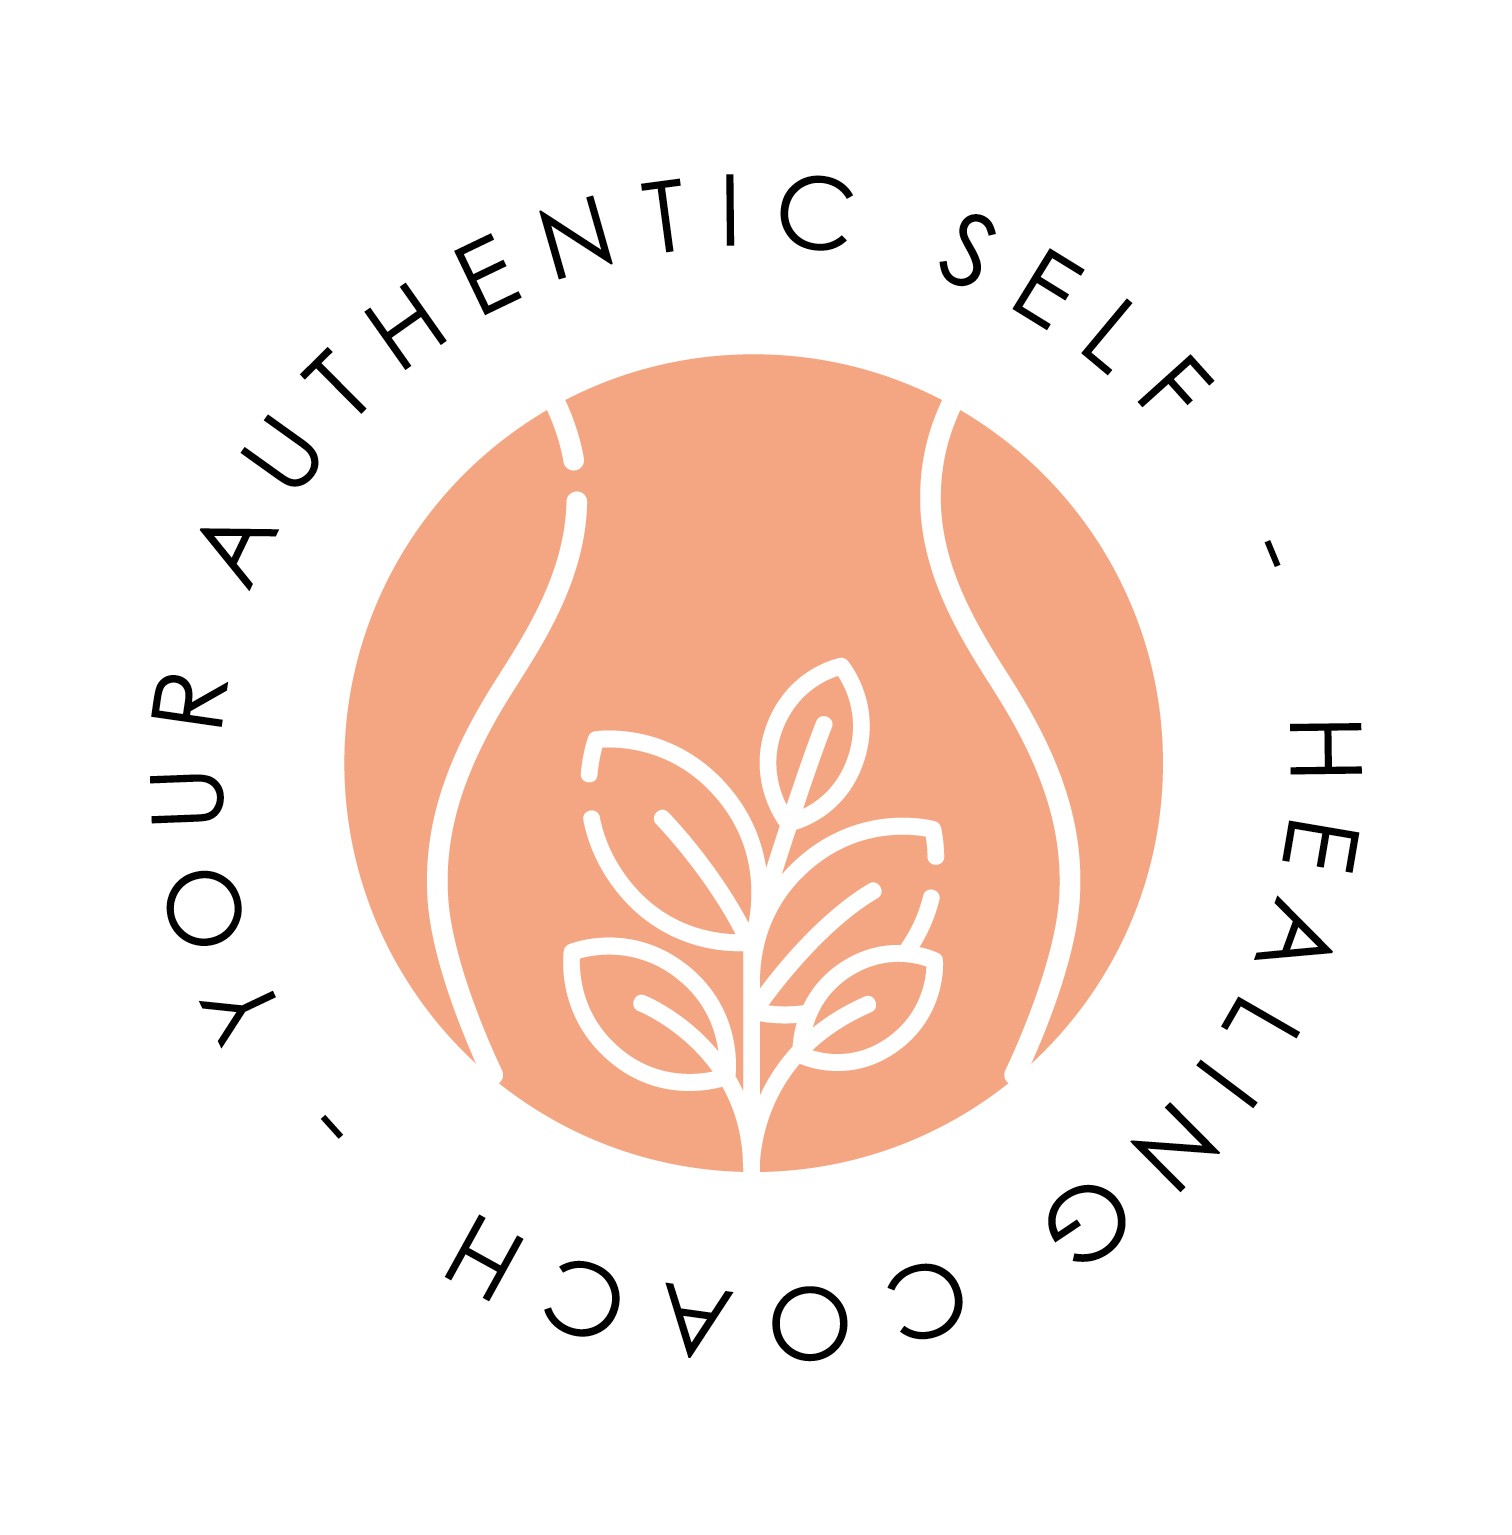 Alyson Horne therapist on Natural Therapy Pages